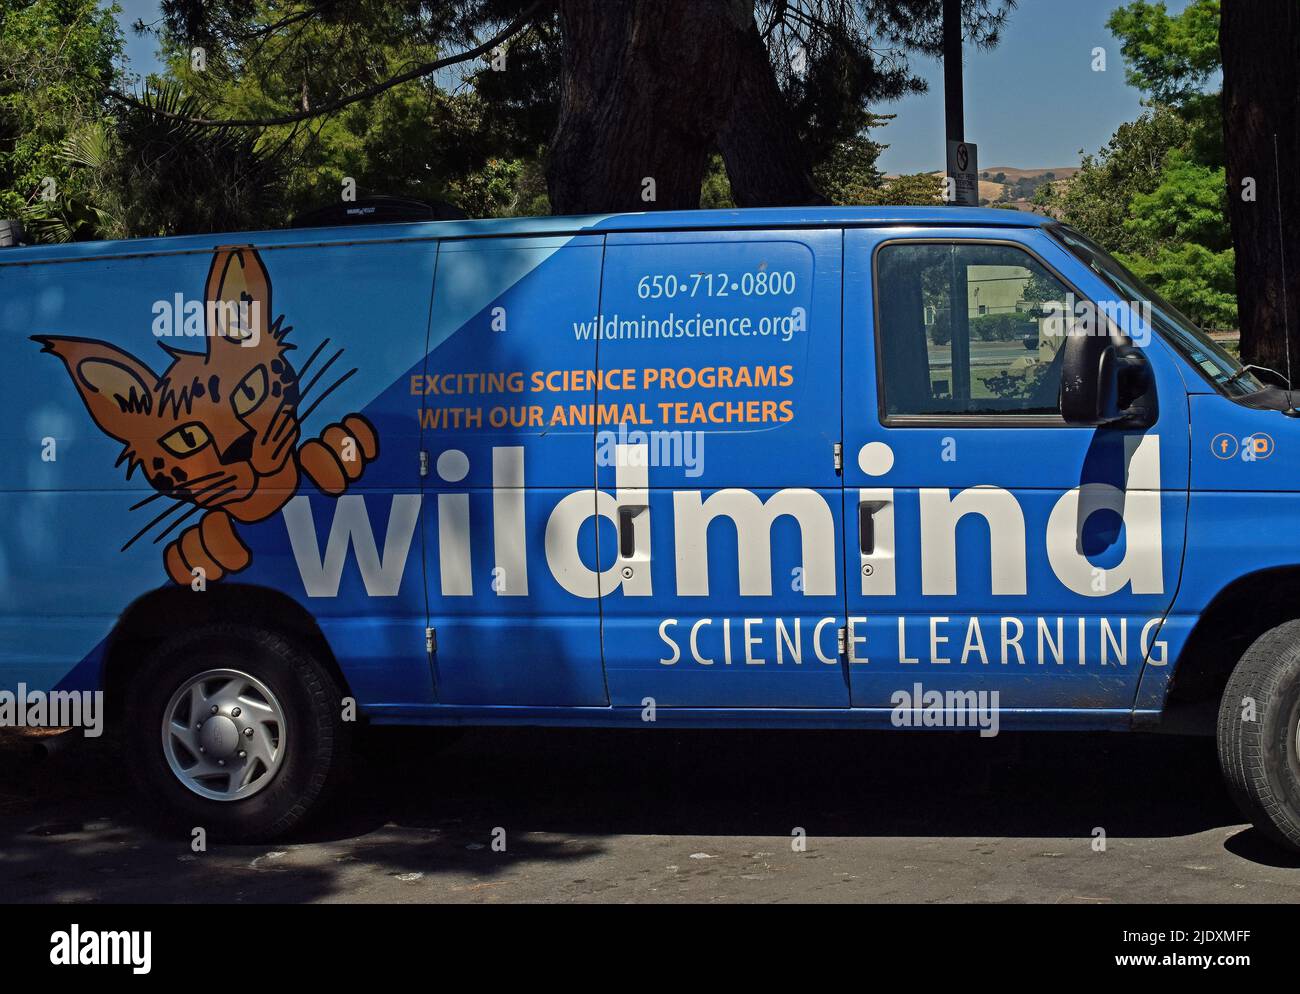 Wildmind science learning van at the Union City Library, California Stock Photo